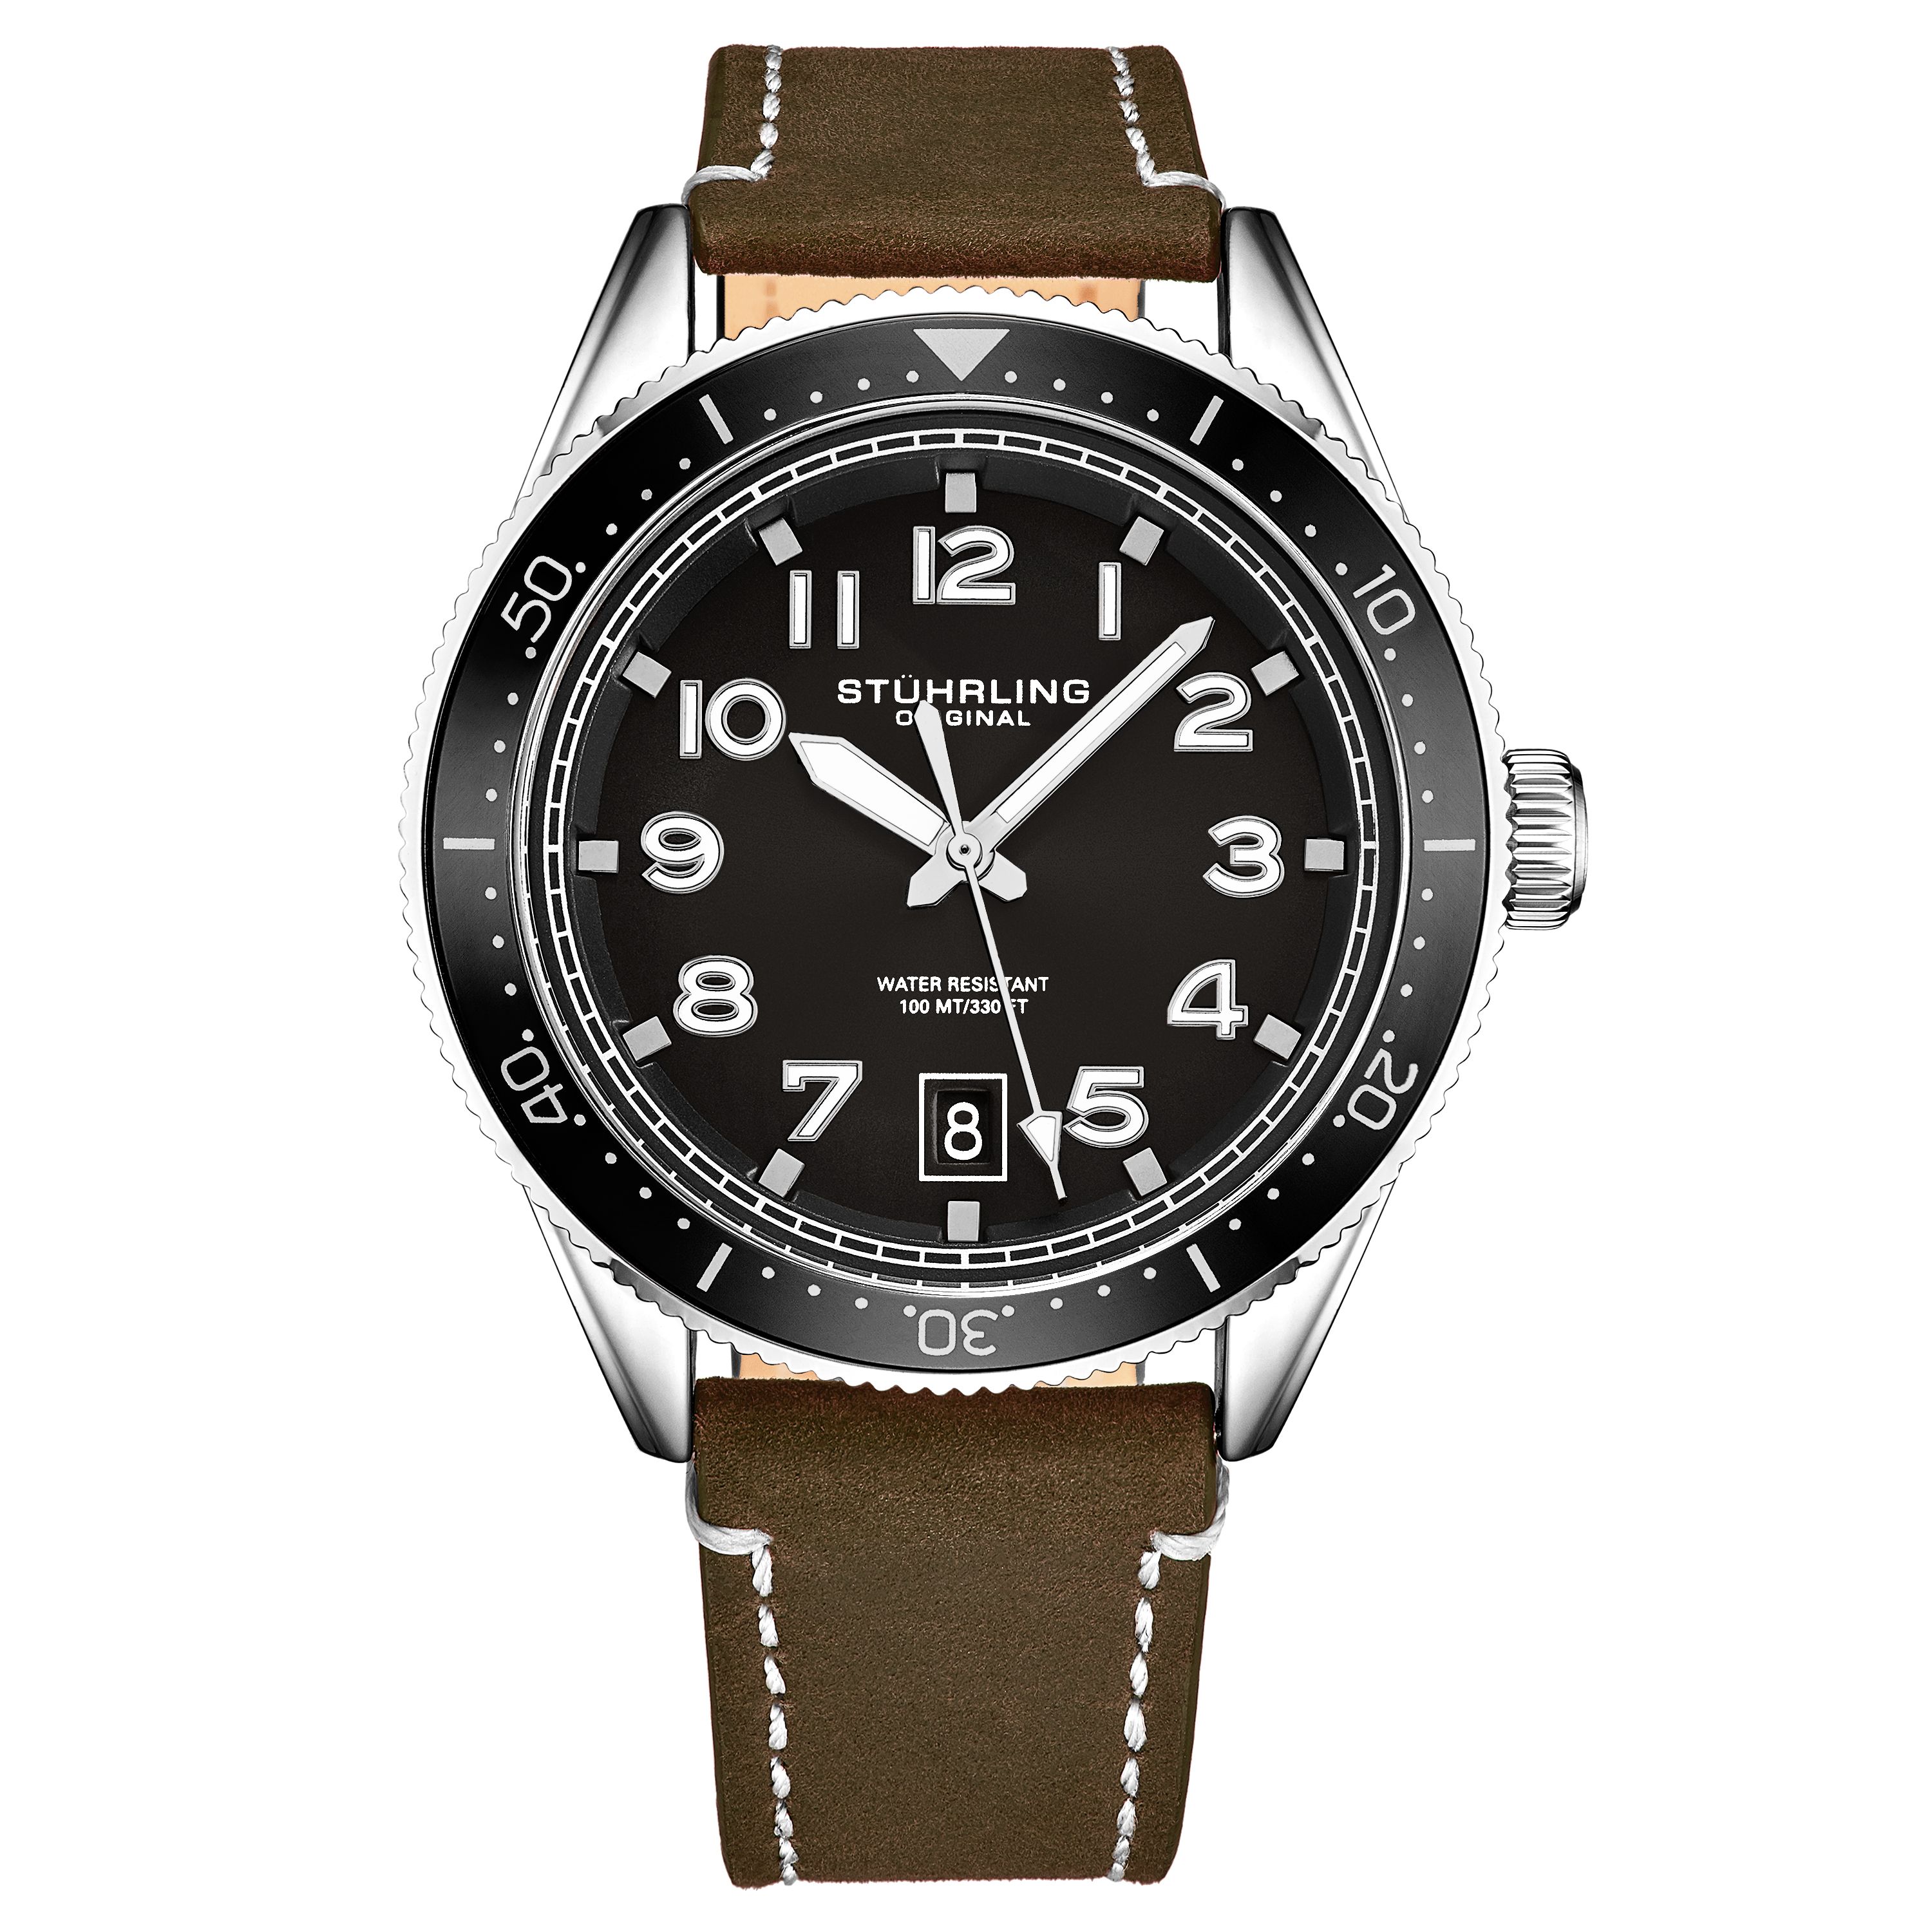 Men's Quartz Silver Case, Black Bezel, Black Dial, Luminous Silver Hands and Markers, Brown Leather Strap with White Contrast Stitching Watch